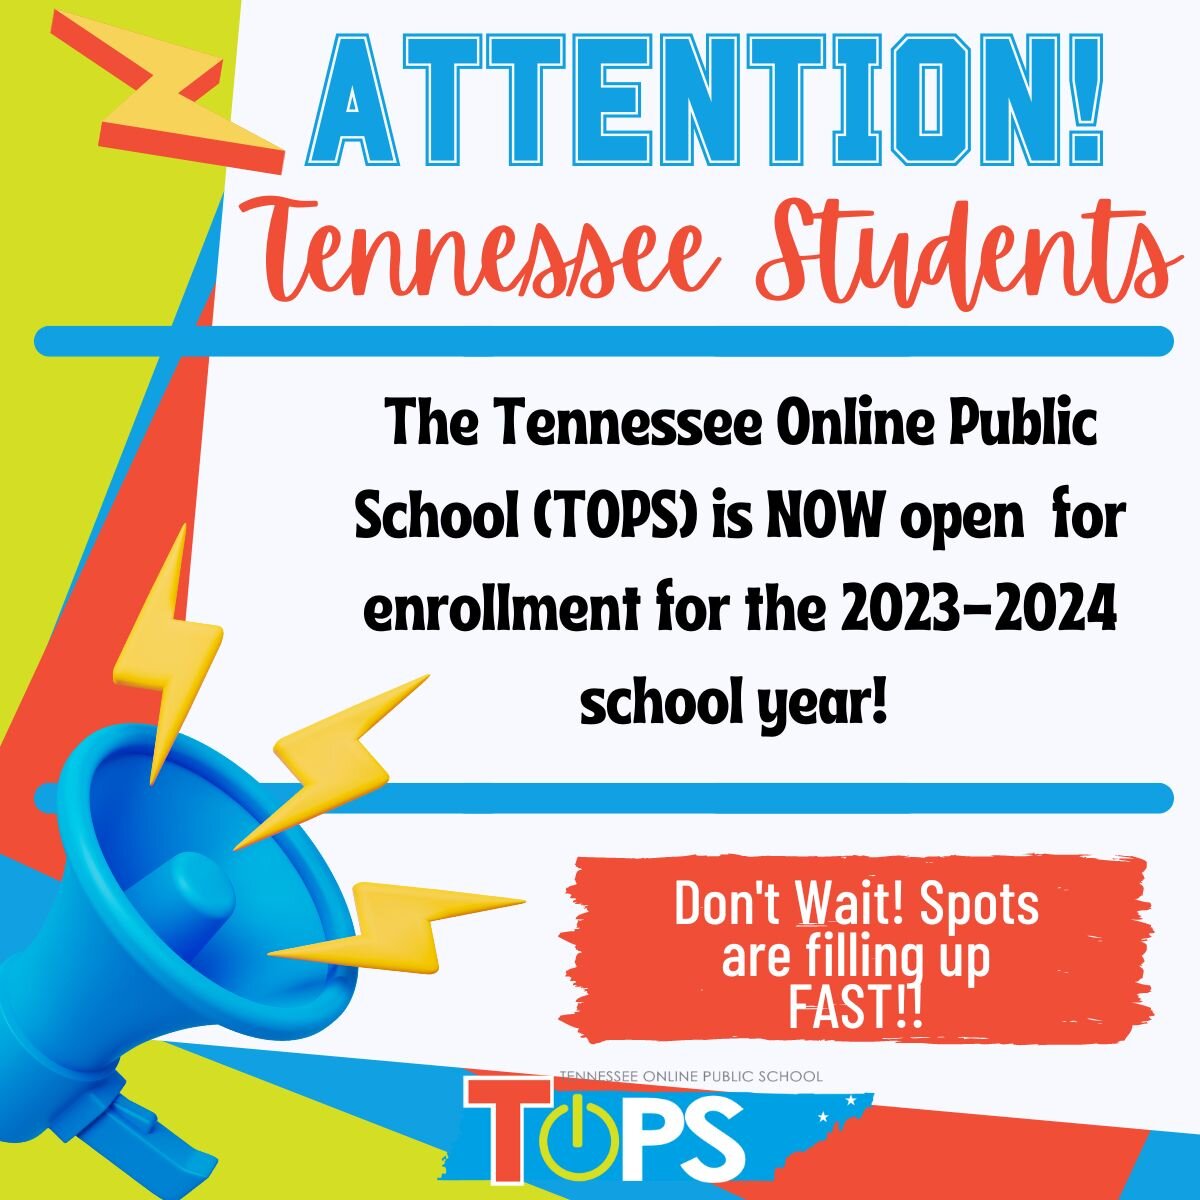 📣 Don't wait - spots are filling up fast! Register today and join the TOPS community! 📣

The Tennessee Online Public School (TOPS) is excited to open its virtual doors for the 2023-2024 school year! 🎉📚

We're a free public school offering a uniqu